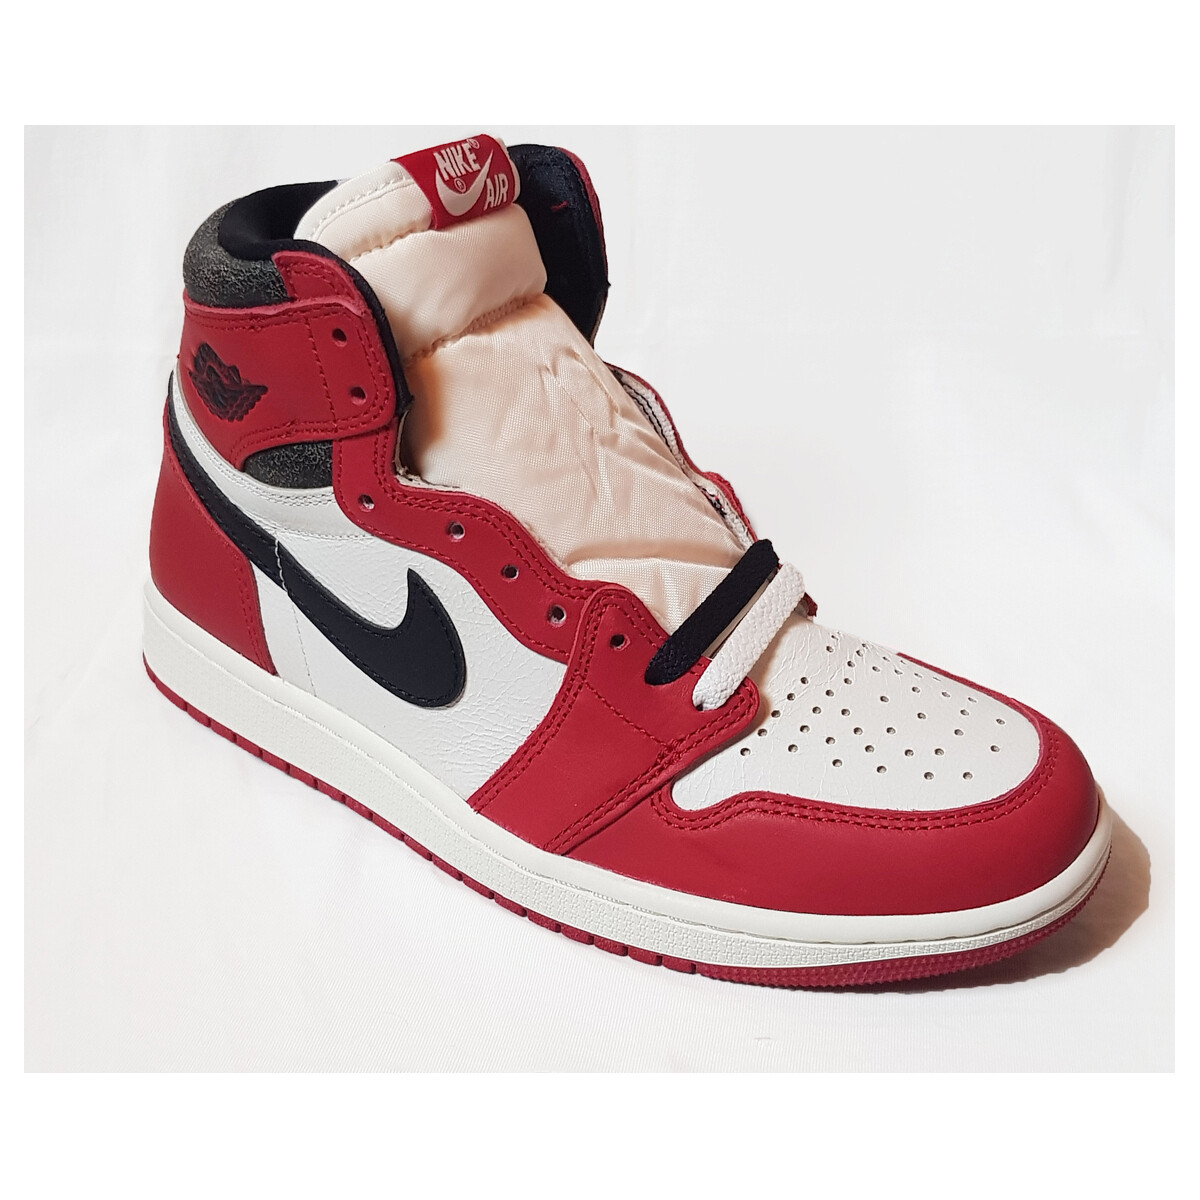 Nike Rouge Air Jordan 1 High Lost and Found - DZ5485-612 - Taille : 38 FR AAnmJqmZ